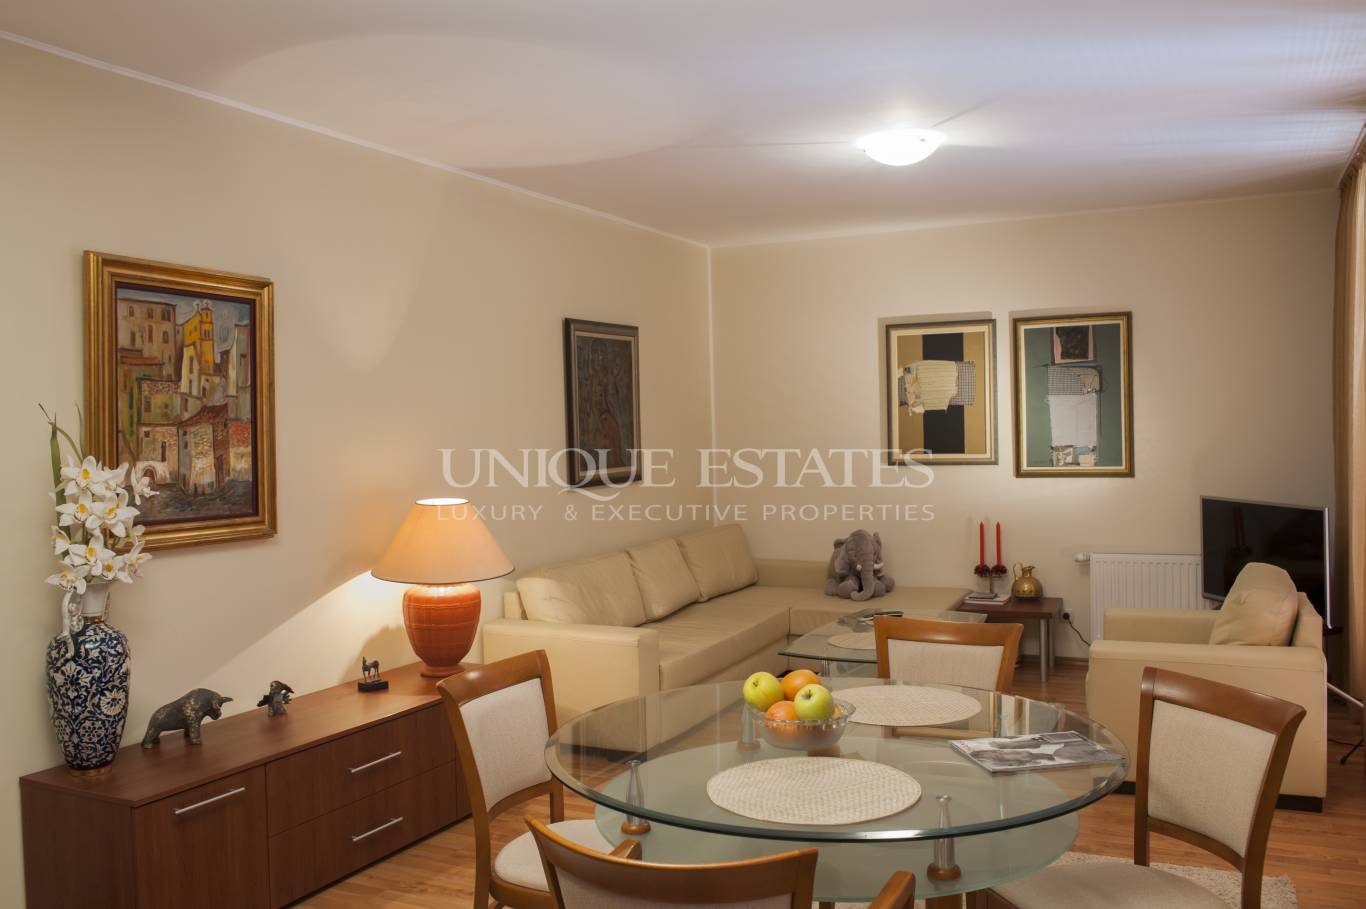 Hotel / Apartment house for sale in Sofia, Vladaya with listing ID: K10953 - image 9